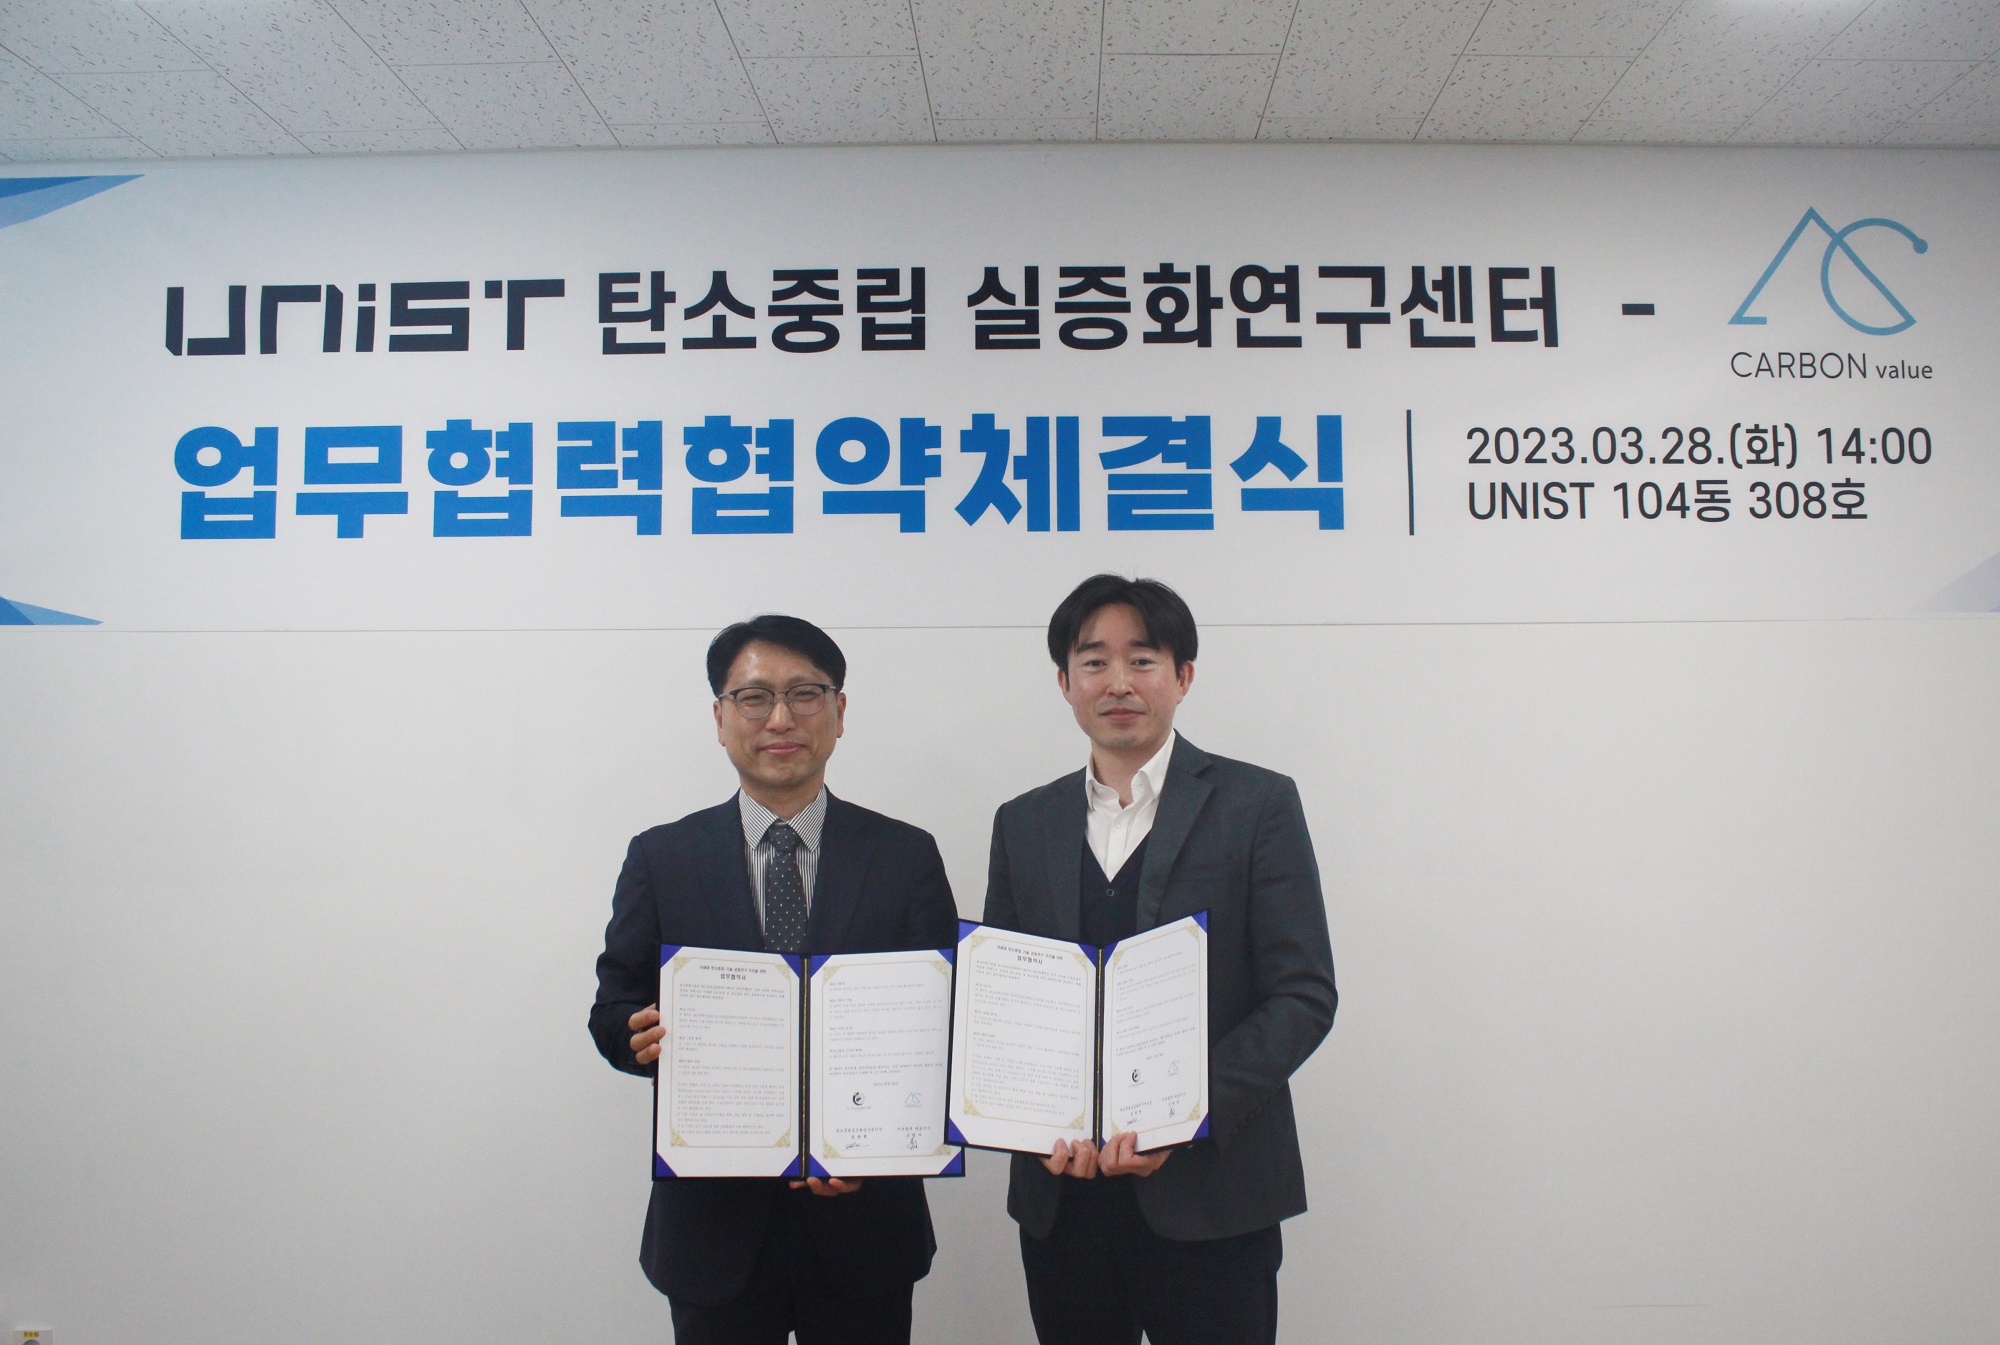 From left are Director Hankwon Lim and President Deoksoo Ko of Carbon Value Co., Ltd.